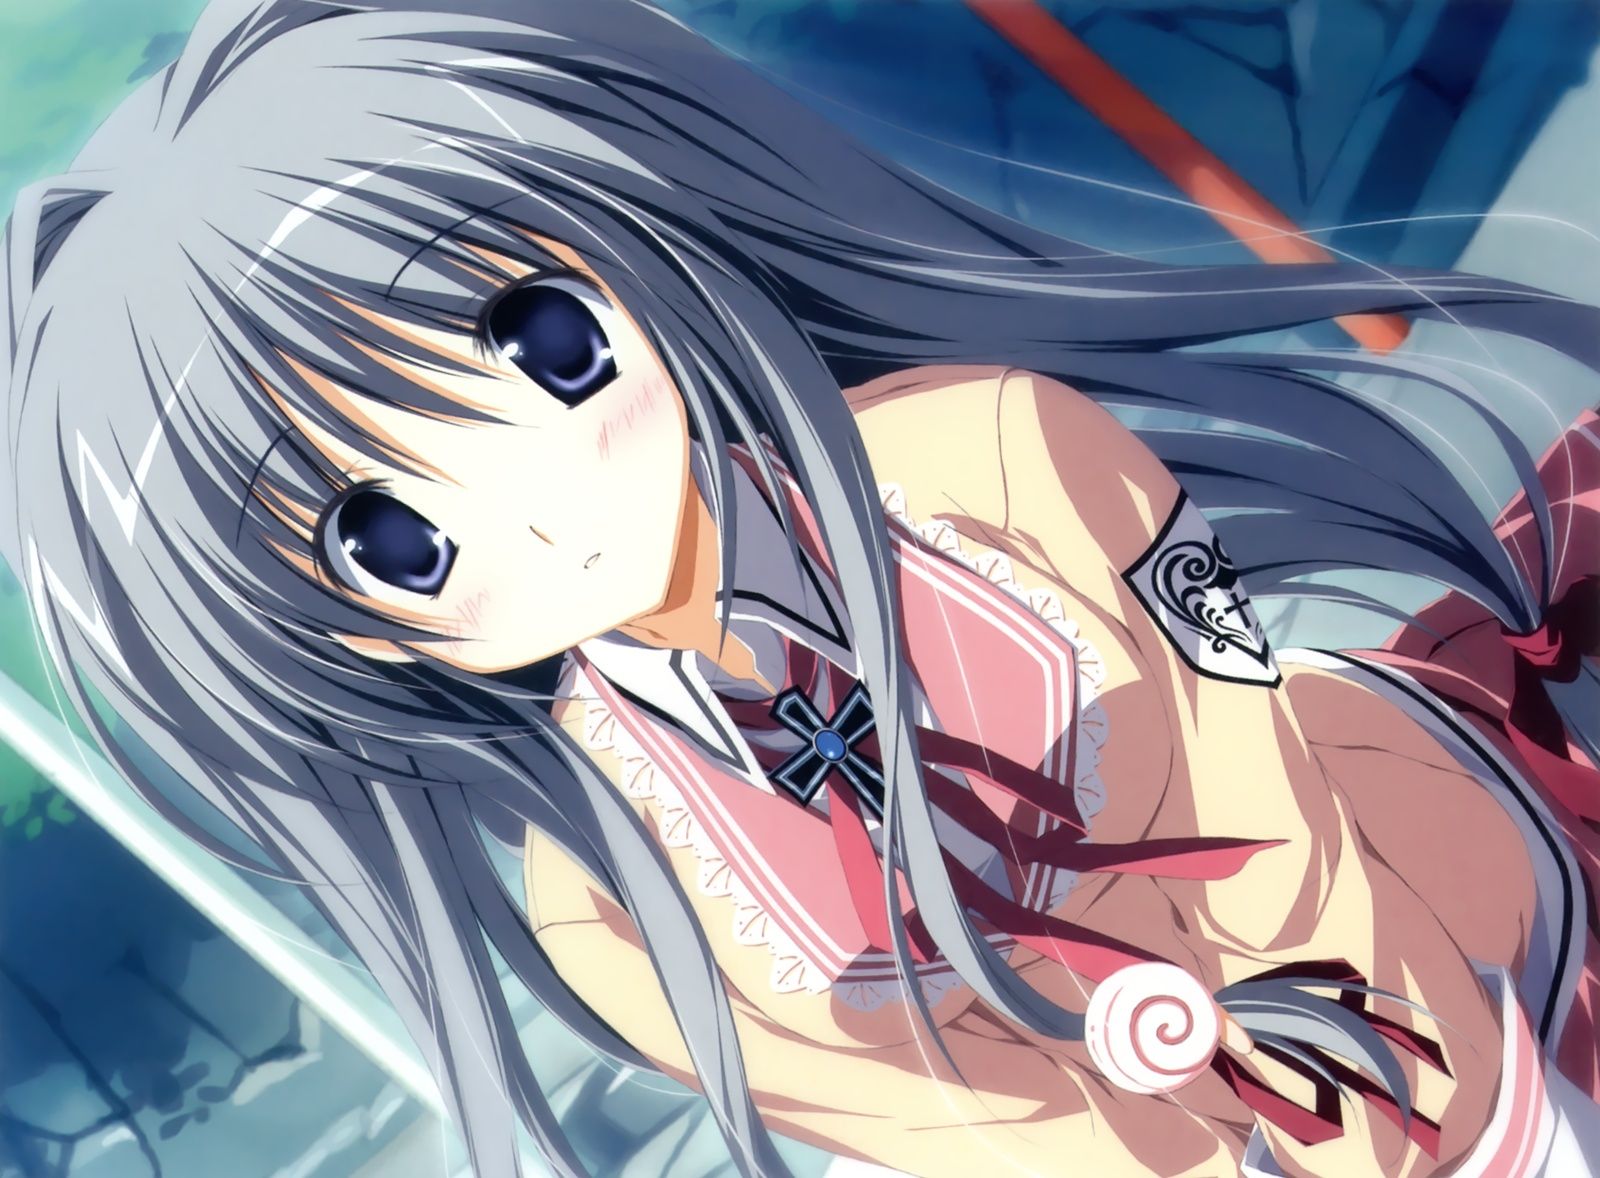 Sekai puffy and-minature y de ¨ [18 PC Bishoujo game CG] erotic wallpapers and pictures part 2 7